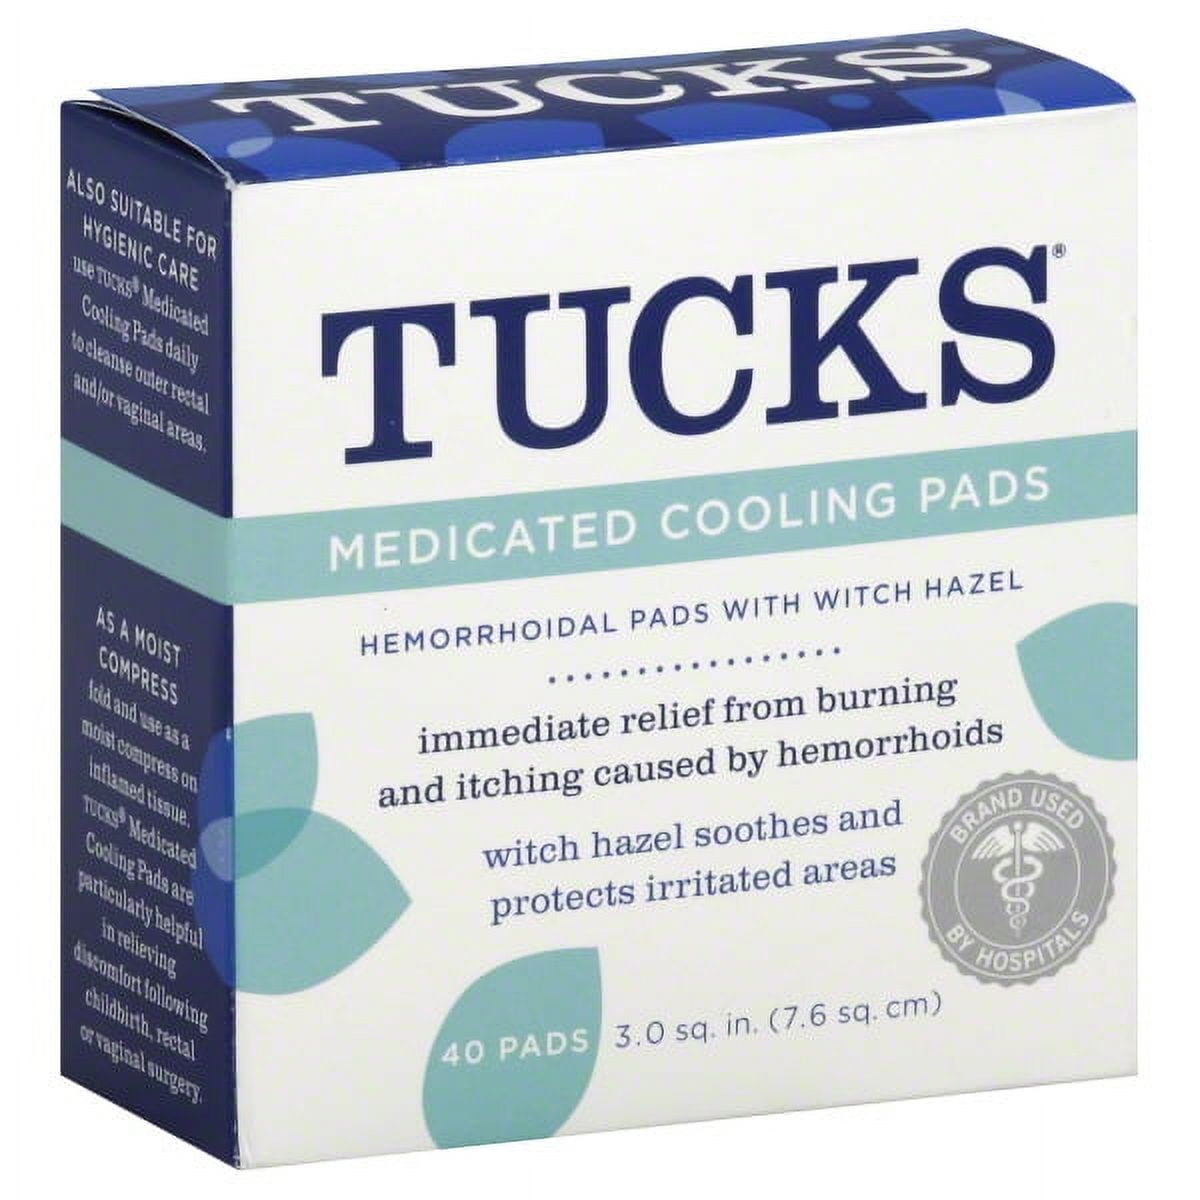 Tucks Medicated Cooling Pads Hemorrhoidal, Witch Hazel, 40 Count